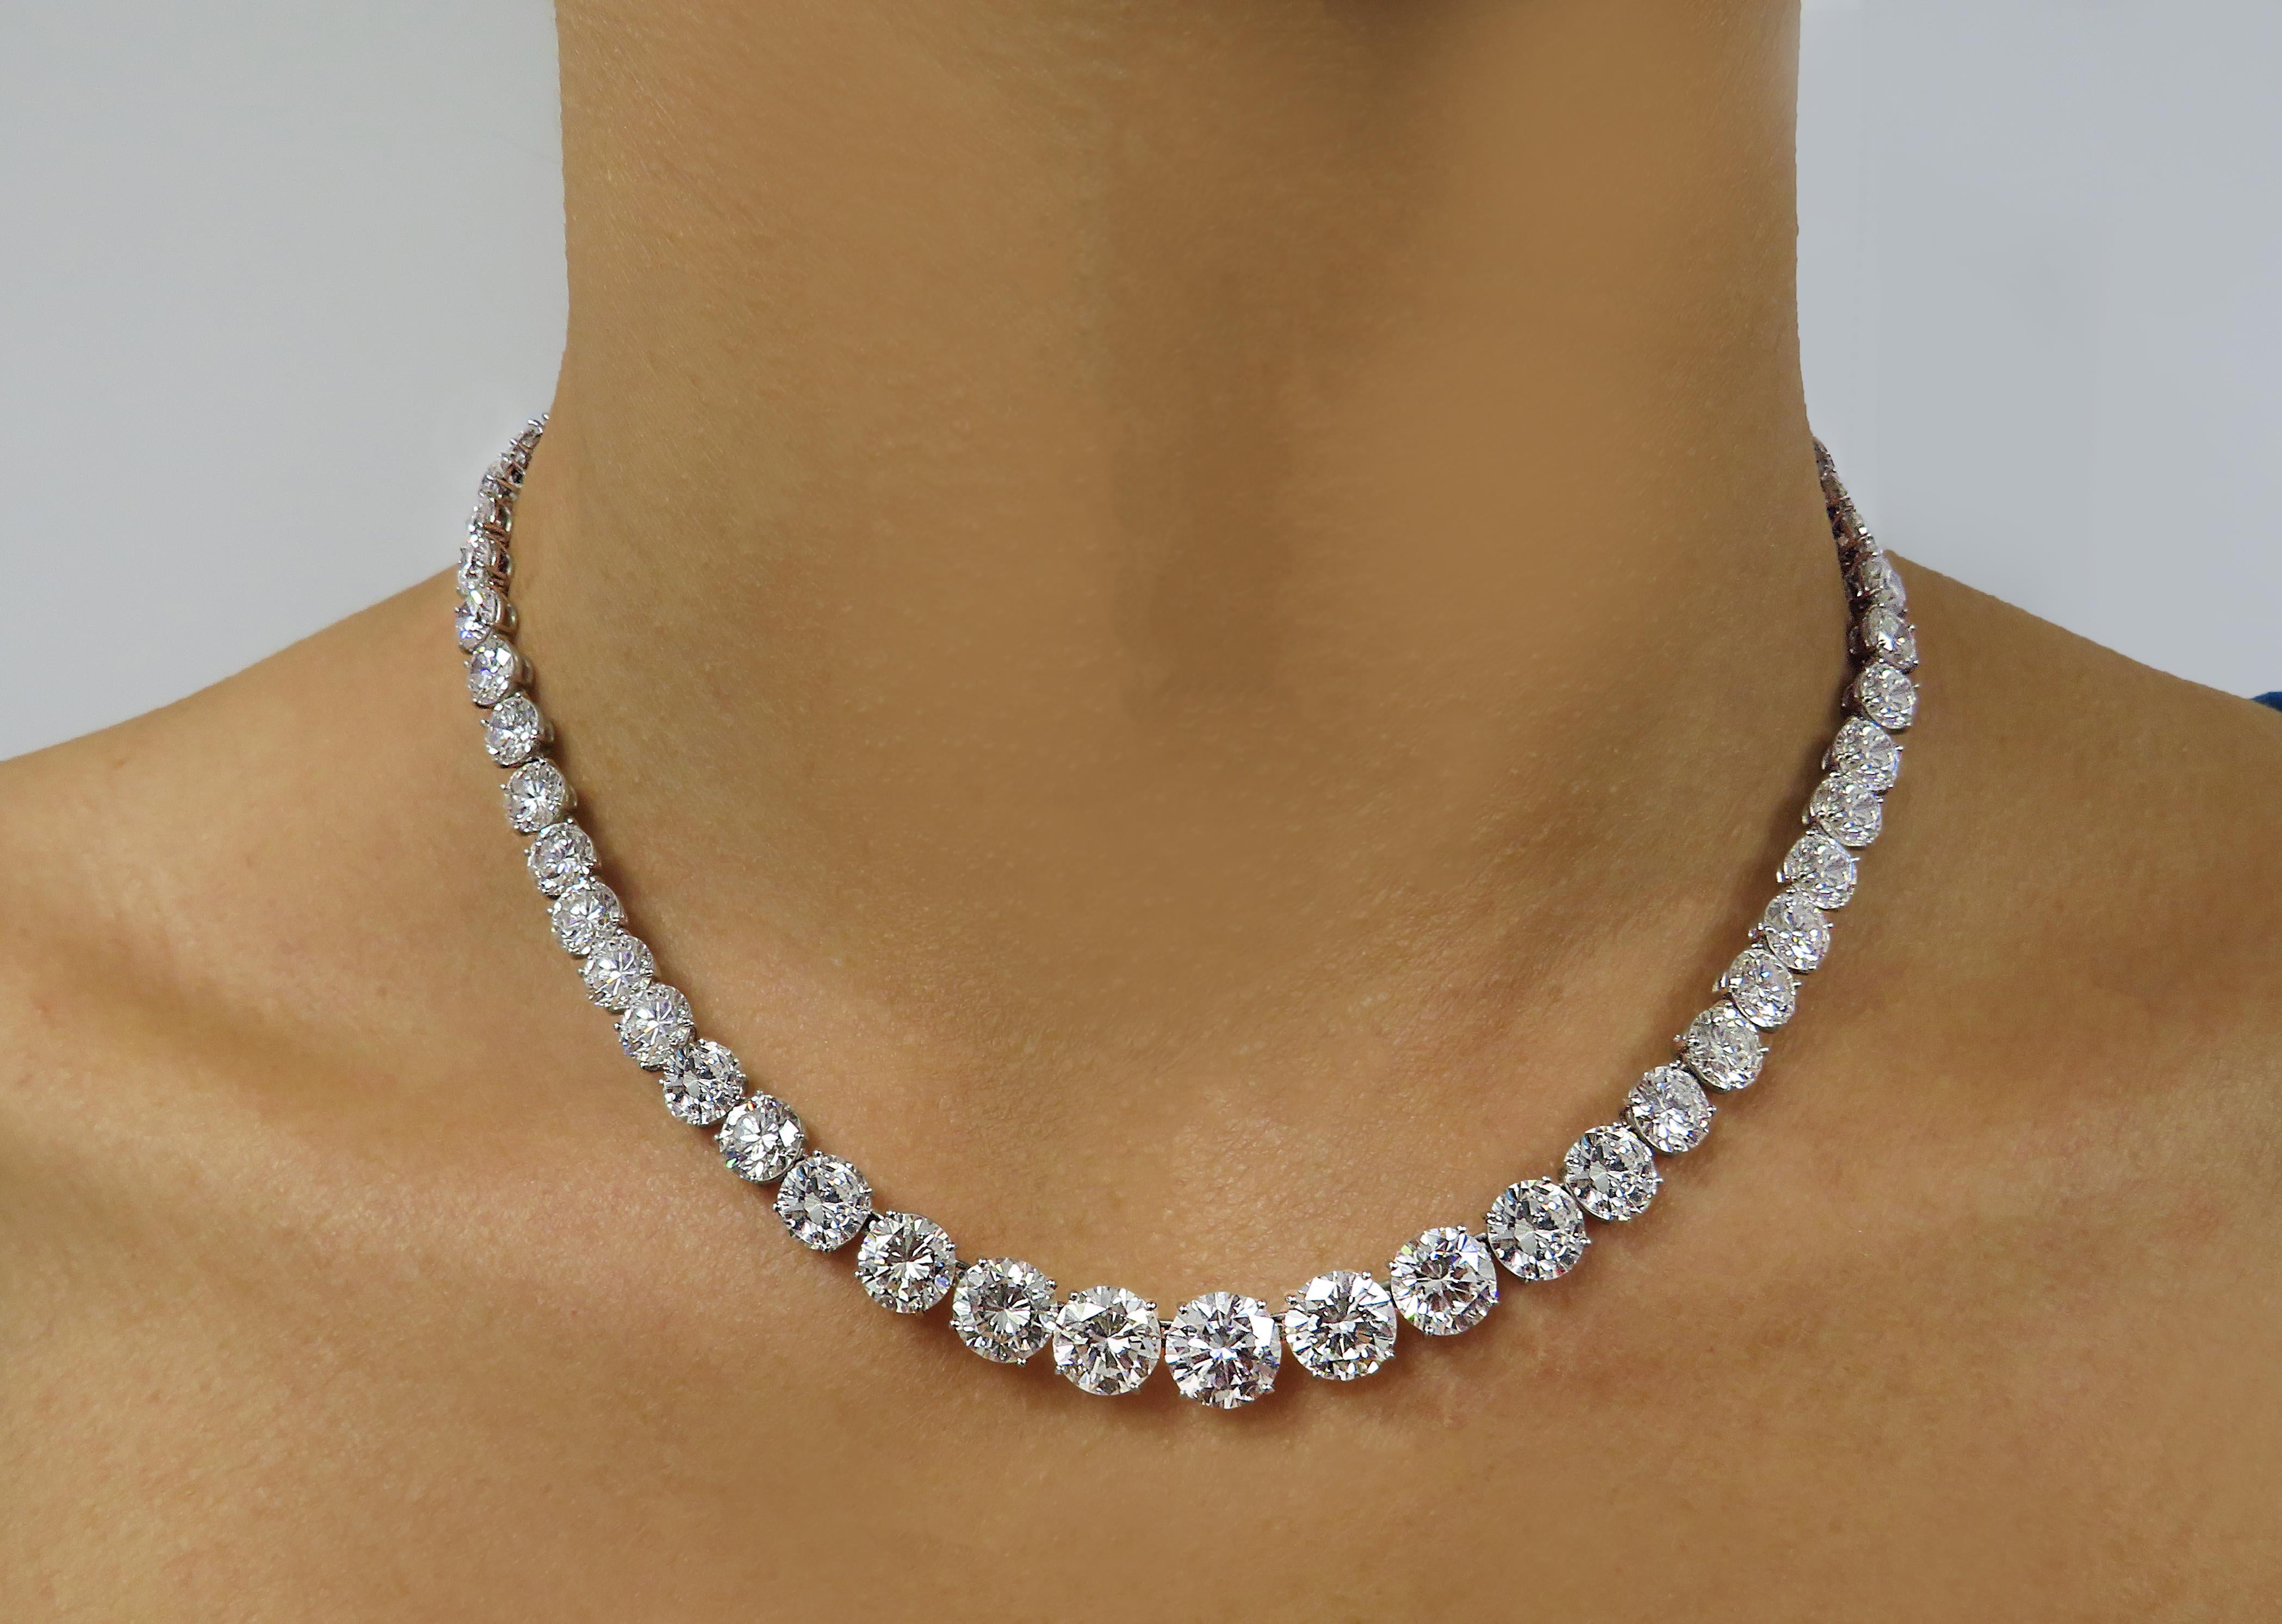 From the legendary House of Harry Winston, this spectacular diamond Riviere necklace, expertly crafted in platinum, showcases 65 sensational round brilliant cut diamonds weighing 44.54 carats total, E-F color, VS clarity. The center 5 diamonds are